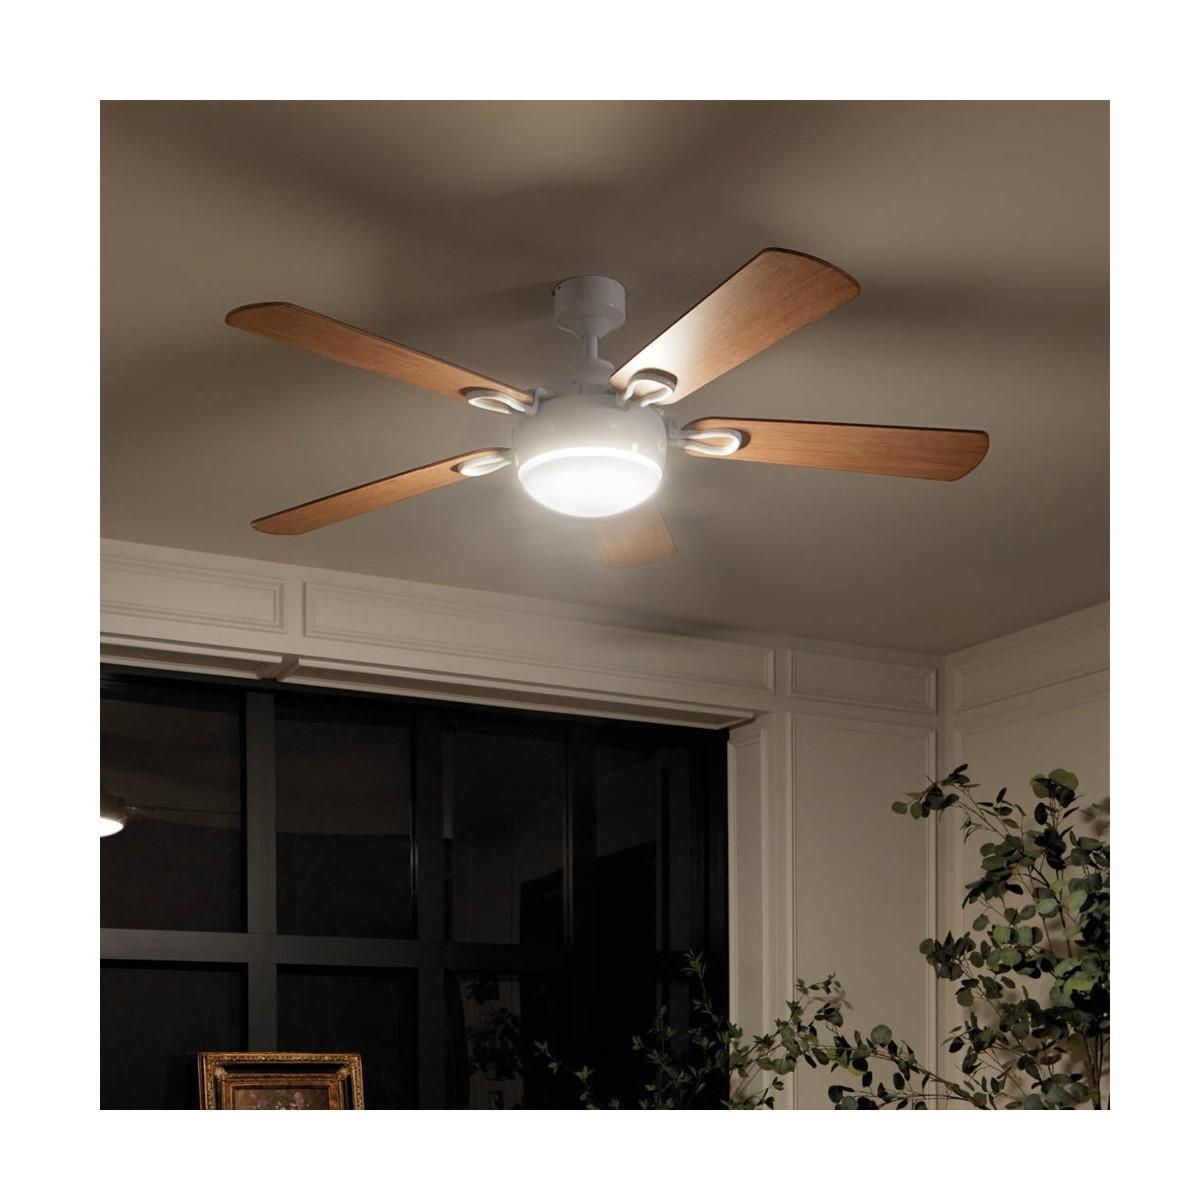 Humble 60 Inch Ceiling Fan With Light, Wall Control Included - Bees Lighting